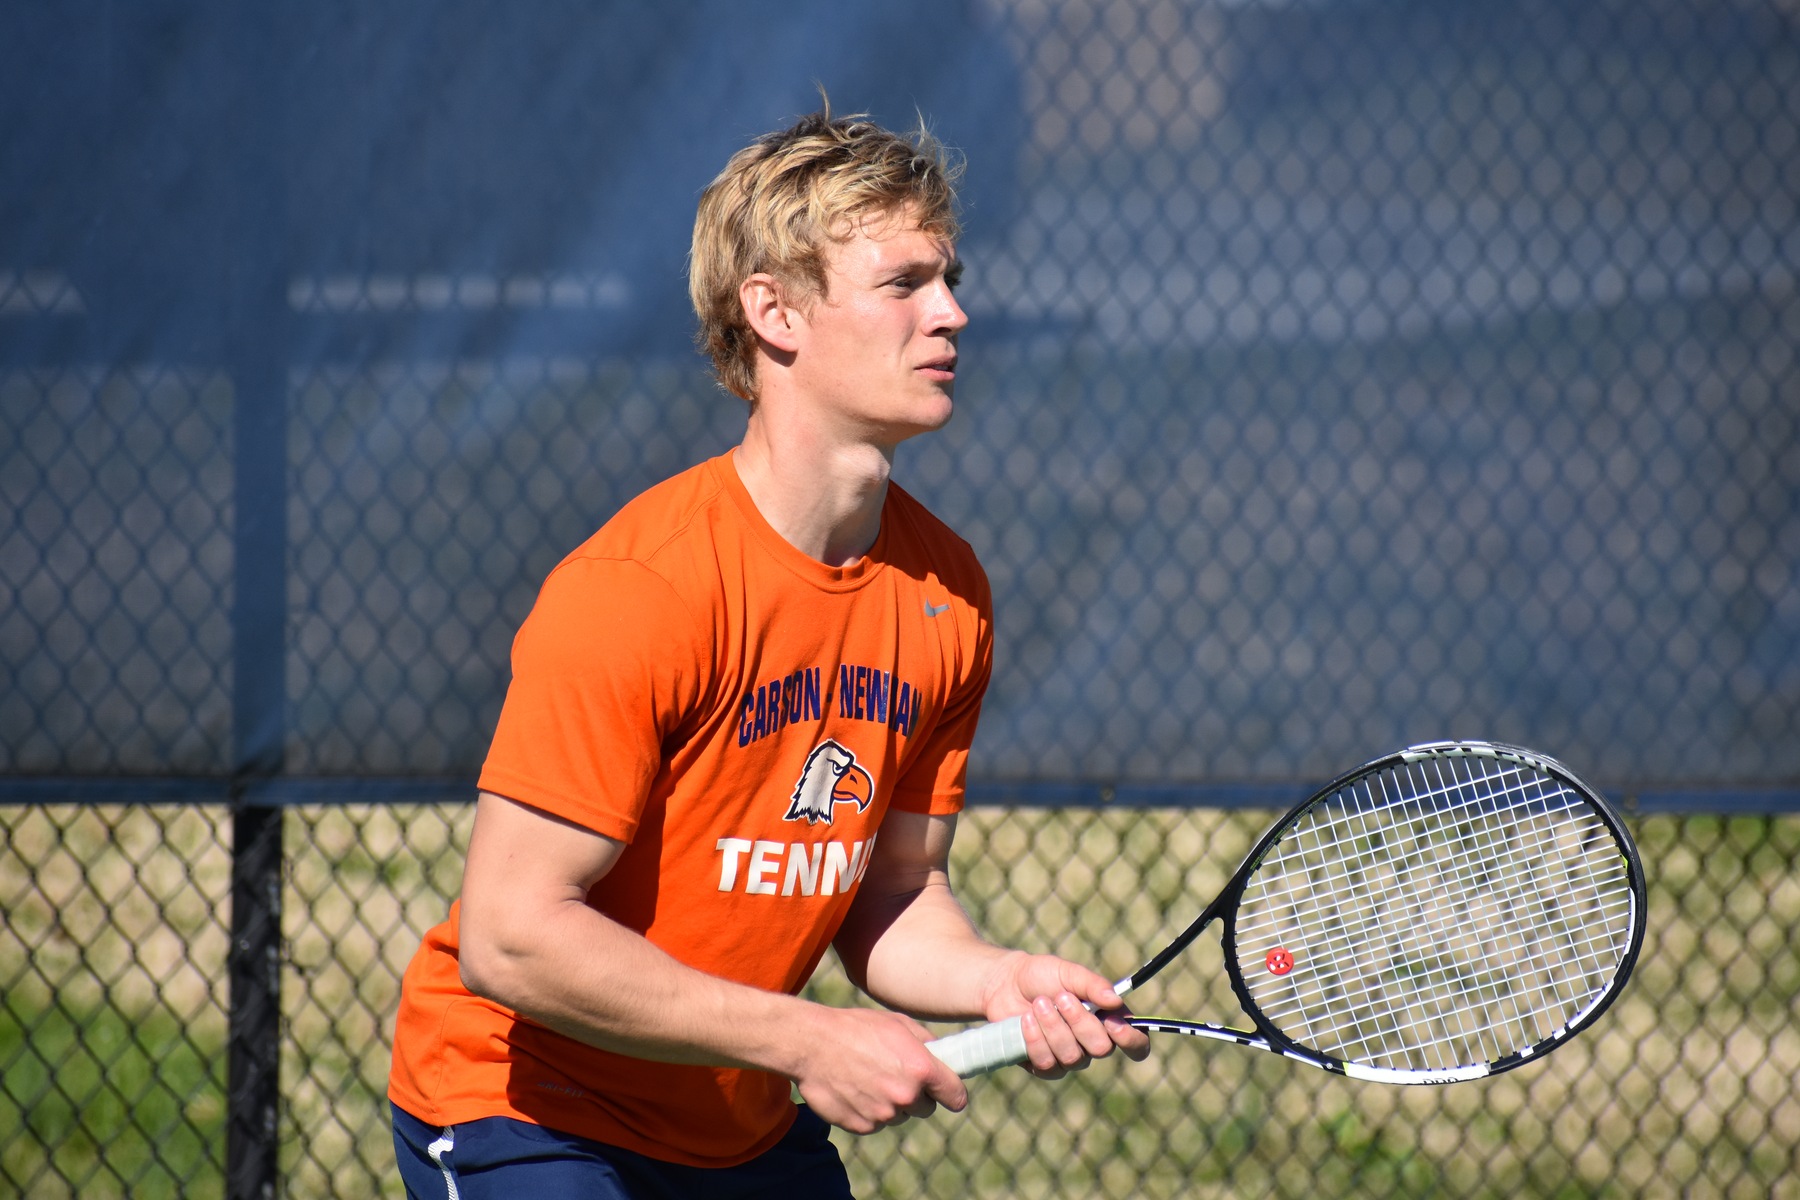 Eagles take tough 4-3 loss against Newberry